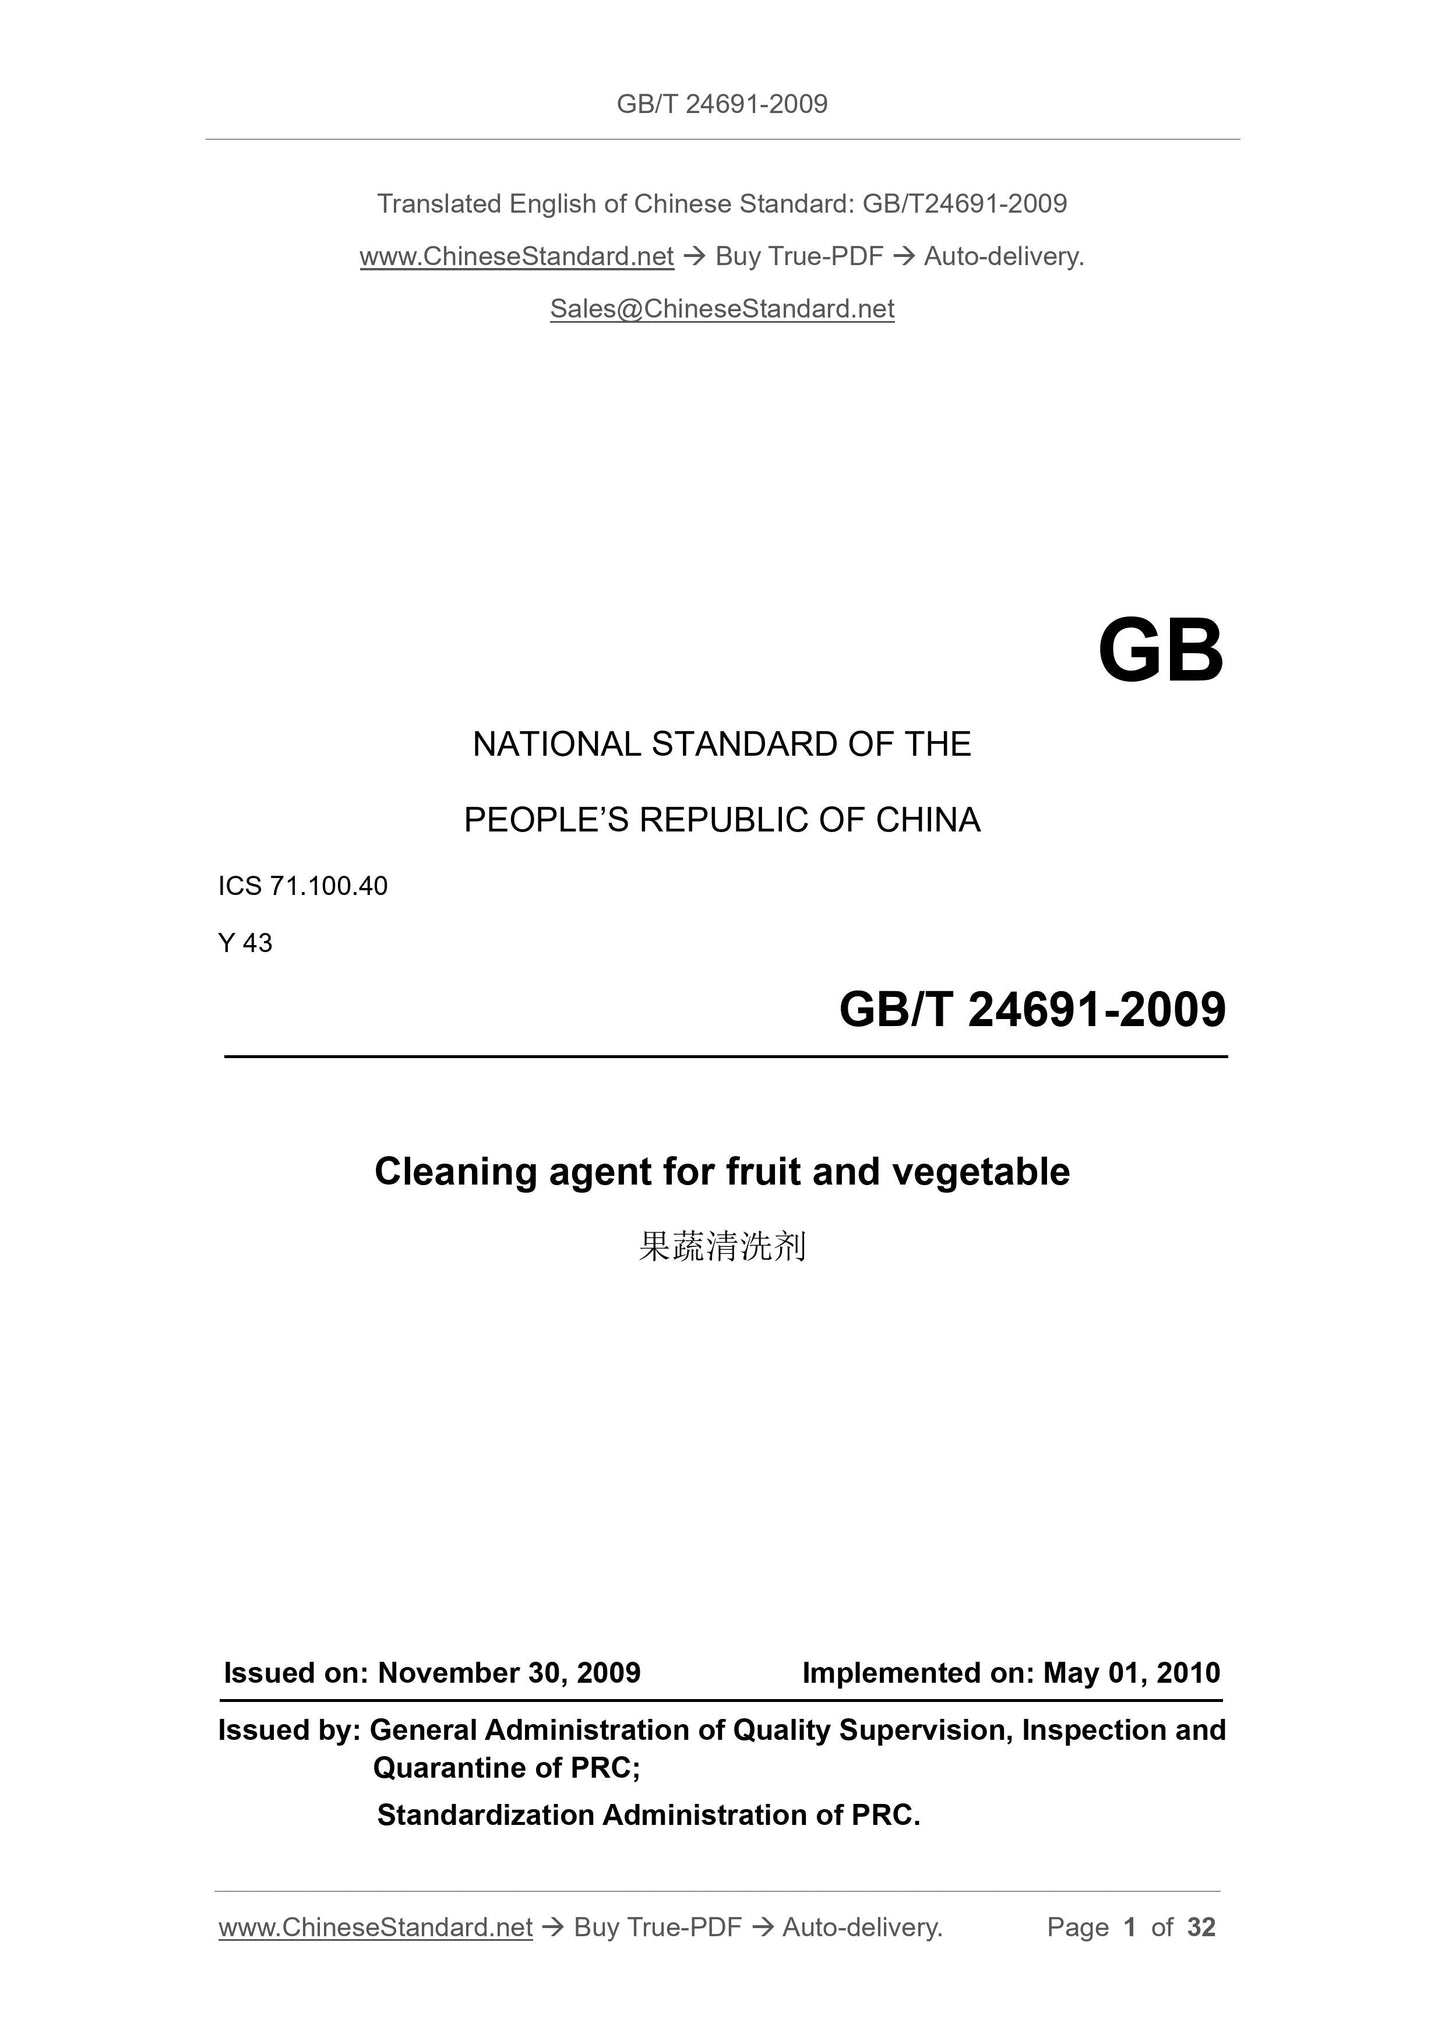 GB/T 24691-2009 Page 1